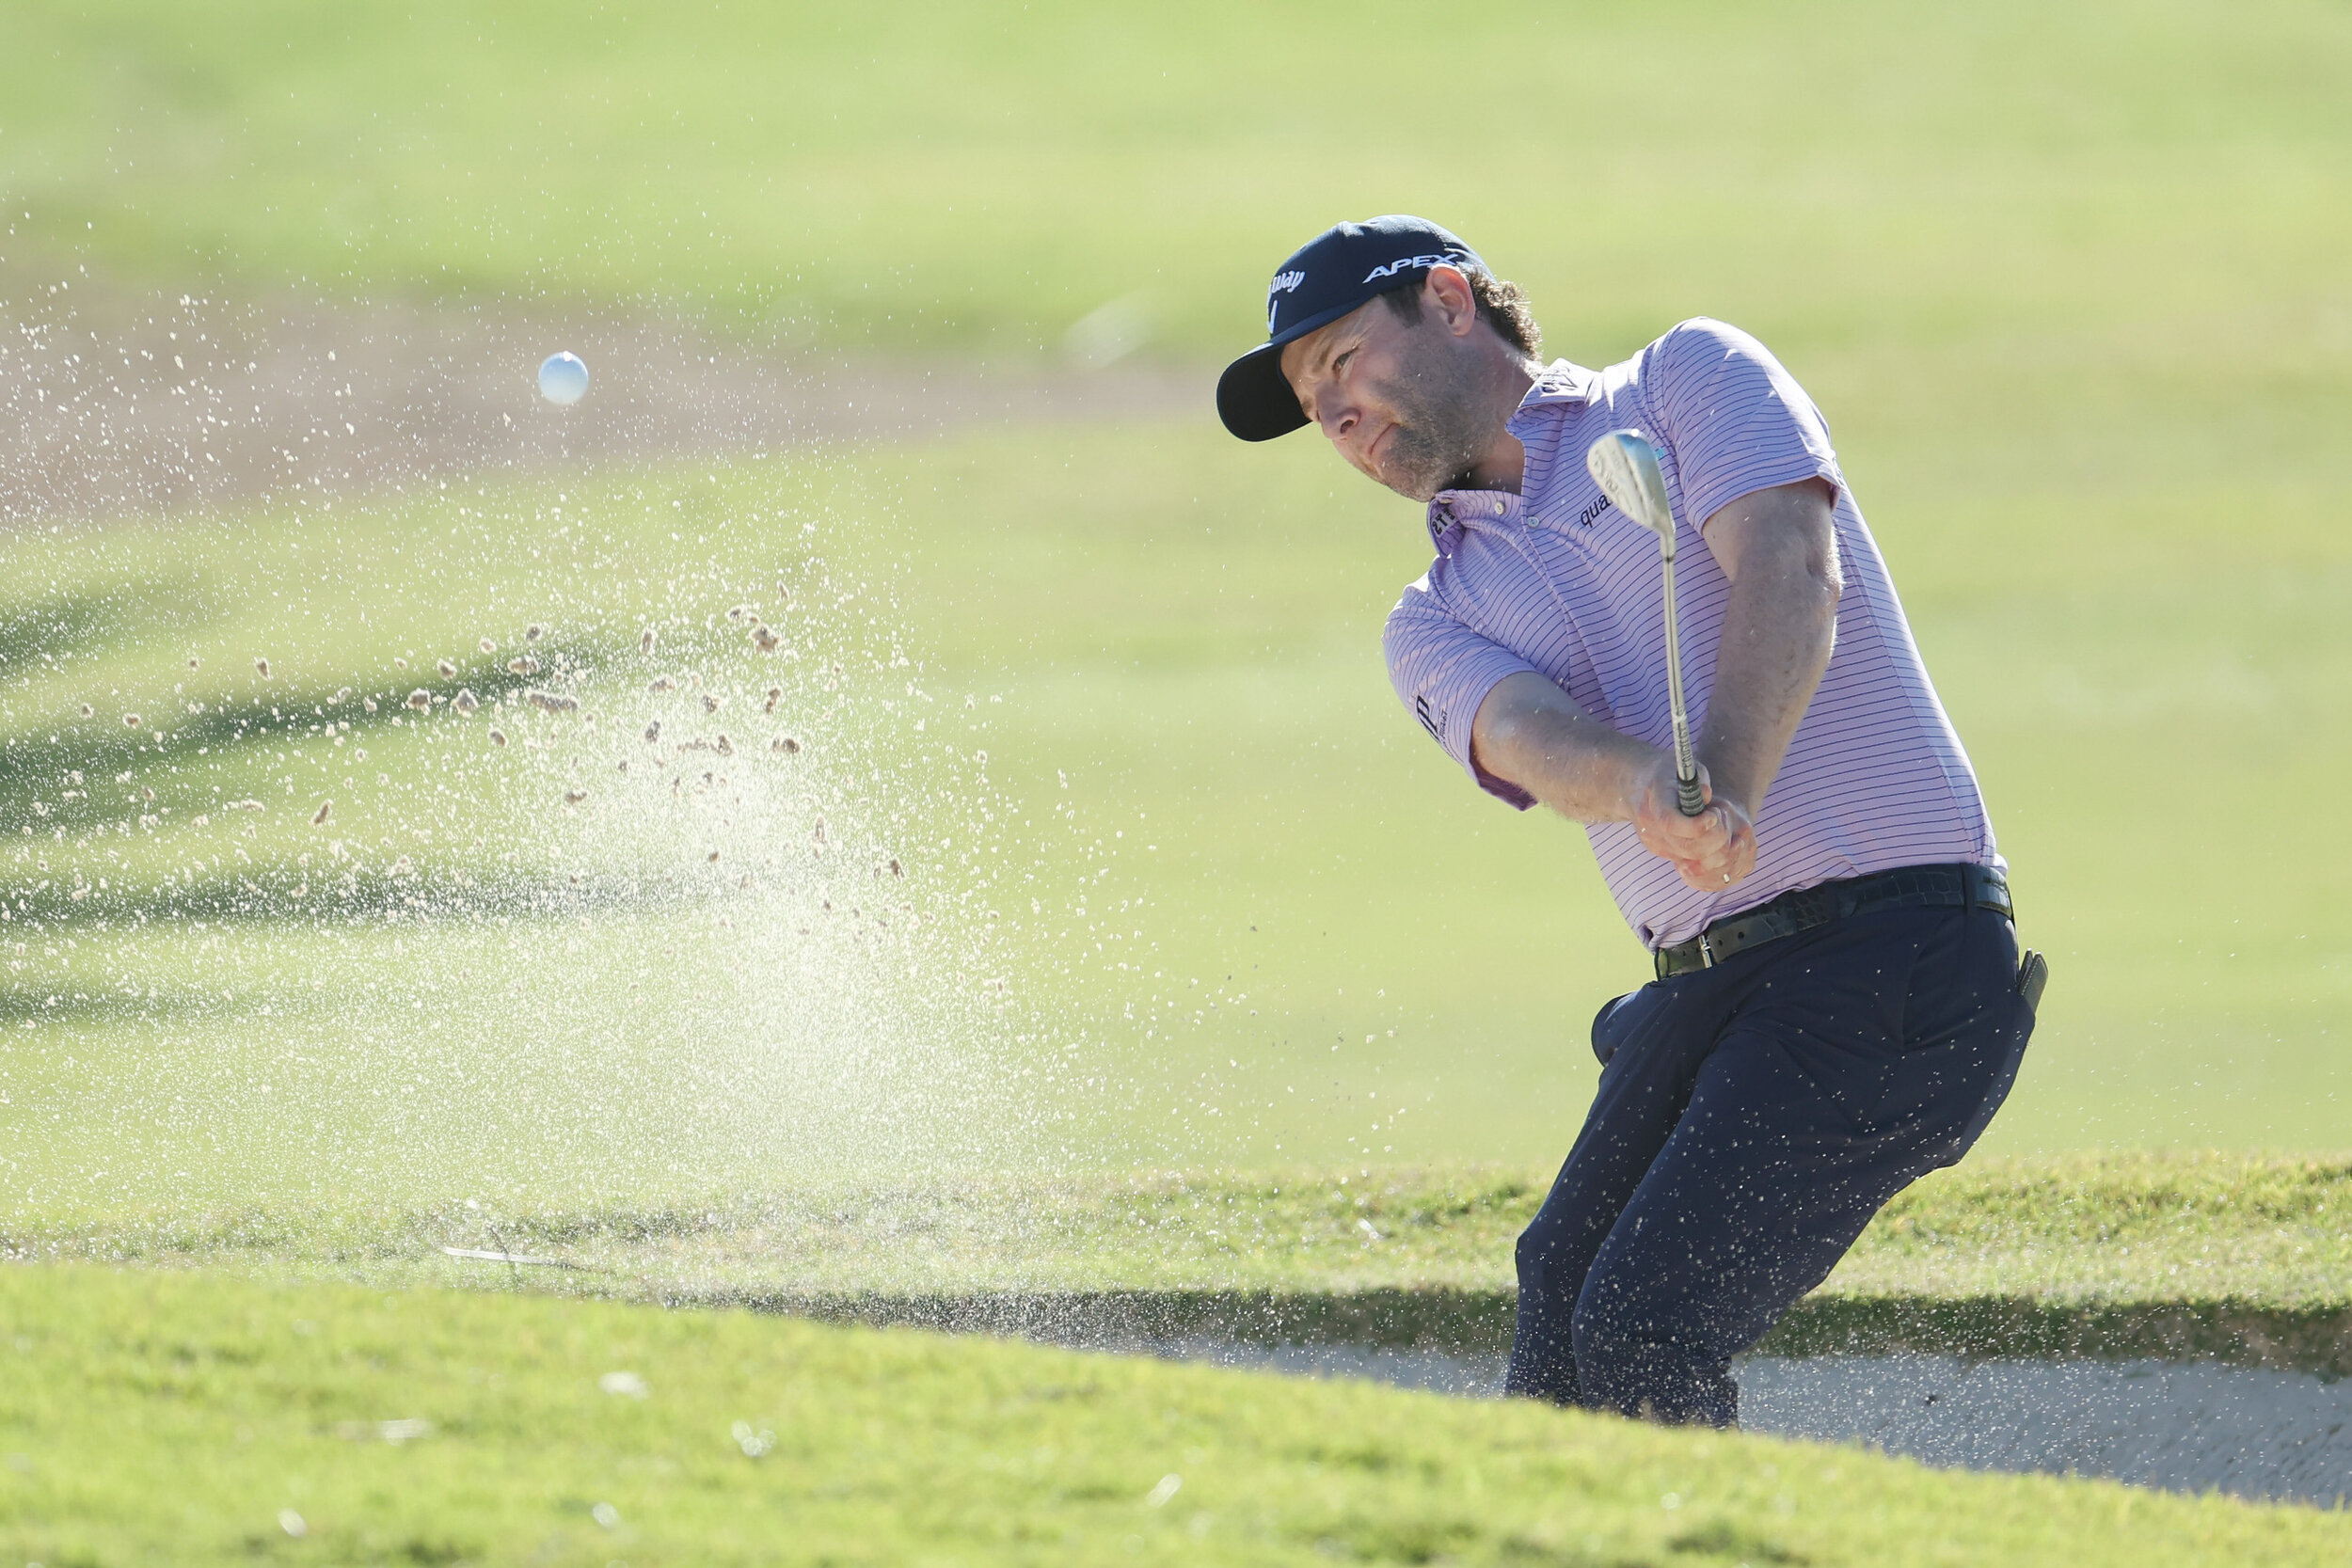  RIO GRANDE, PUERTO RICO - FEBRUARY 28:  Branden Grace of South Africa plays his third shot on the 15th hole during the final round of the Puerto Rico Open at the Grand Reserve Country Club on February 28, 2021 in Rio Grande, Puerto Rico. (Photo by A